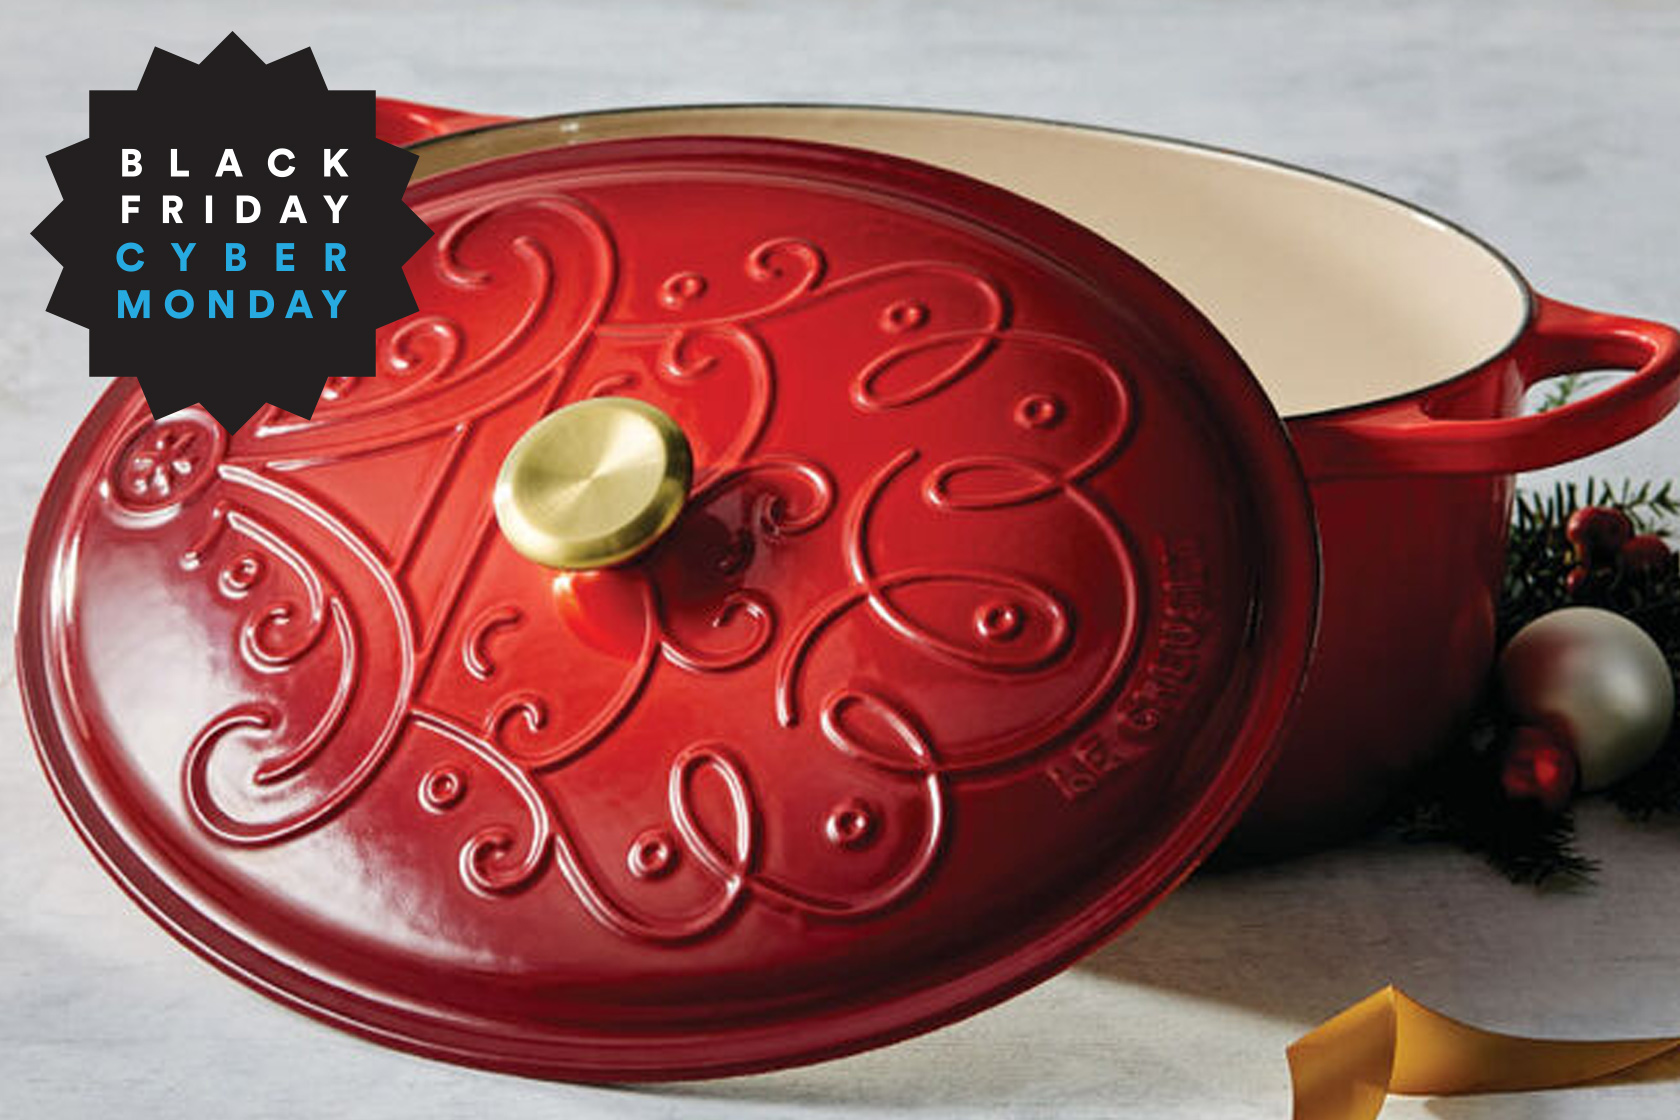 Buy the Le Creuset Cast Iron Deep Oven for $130 off right now